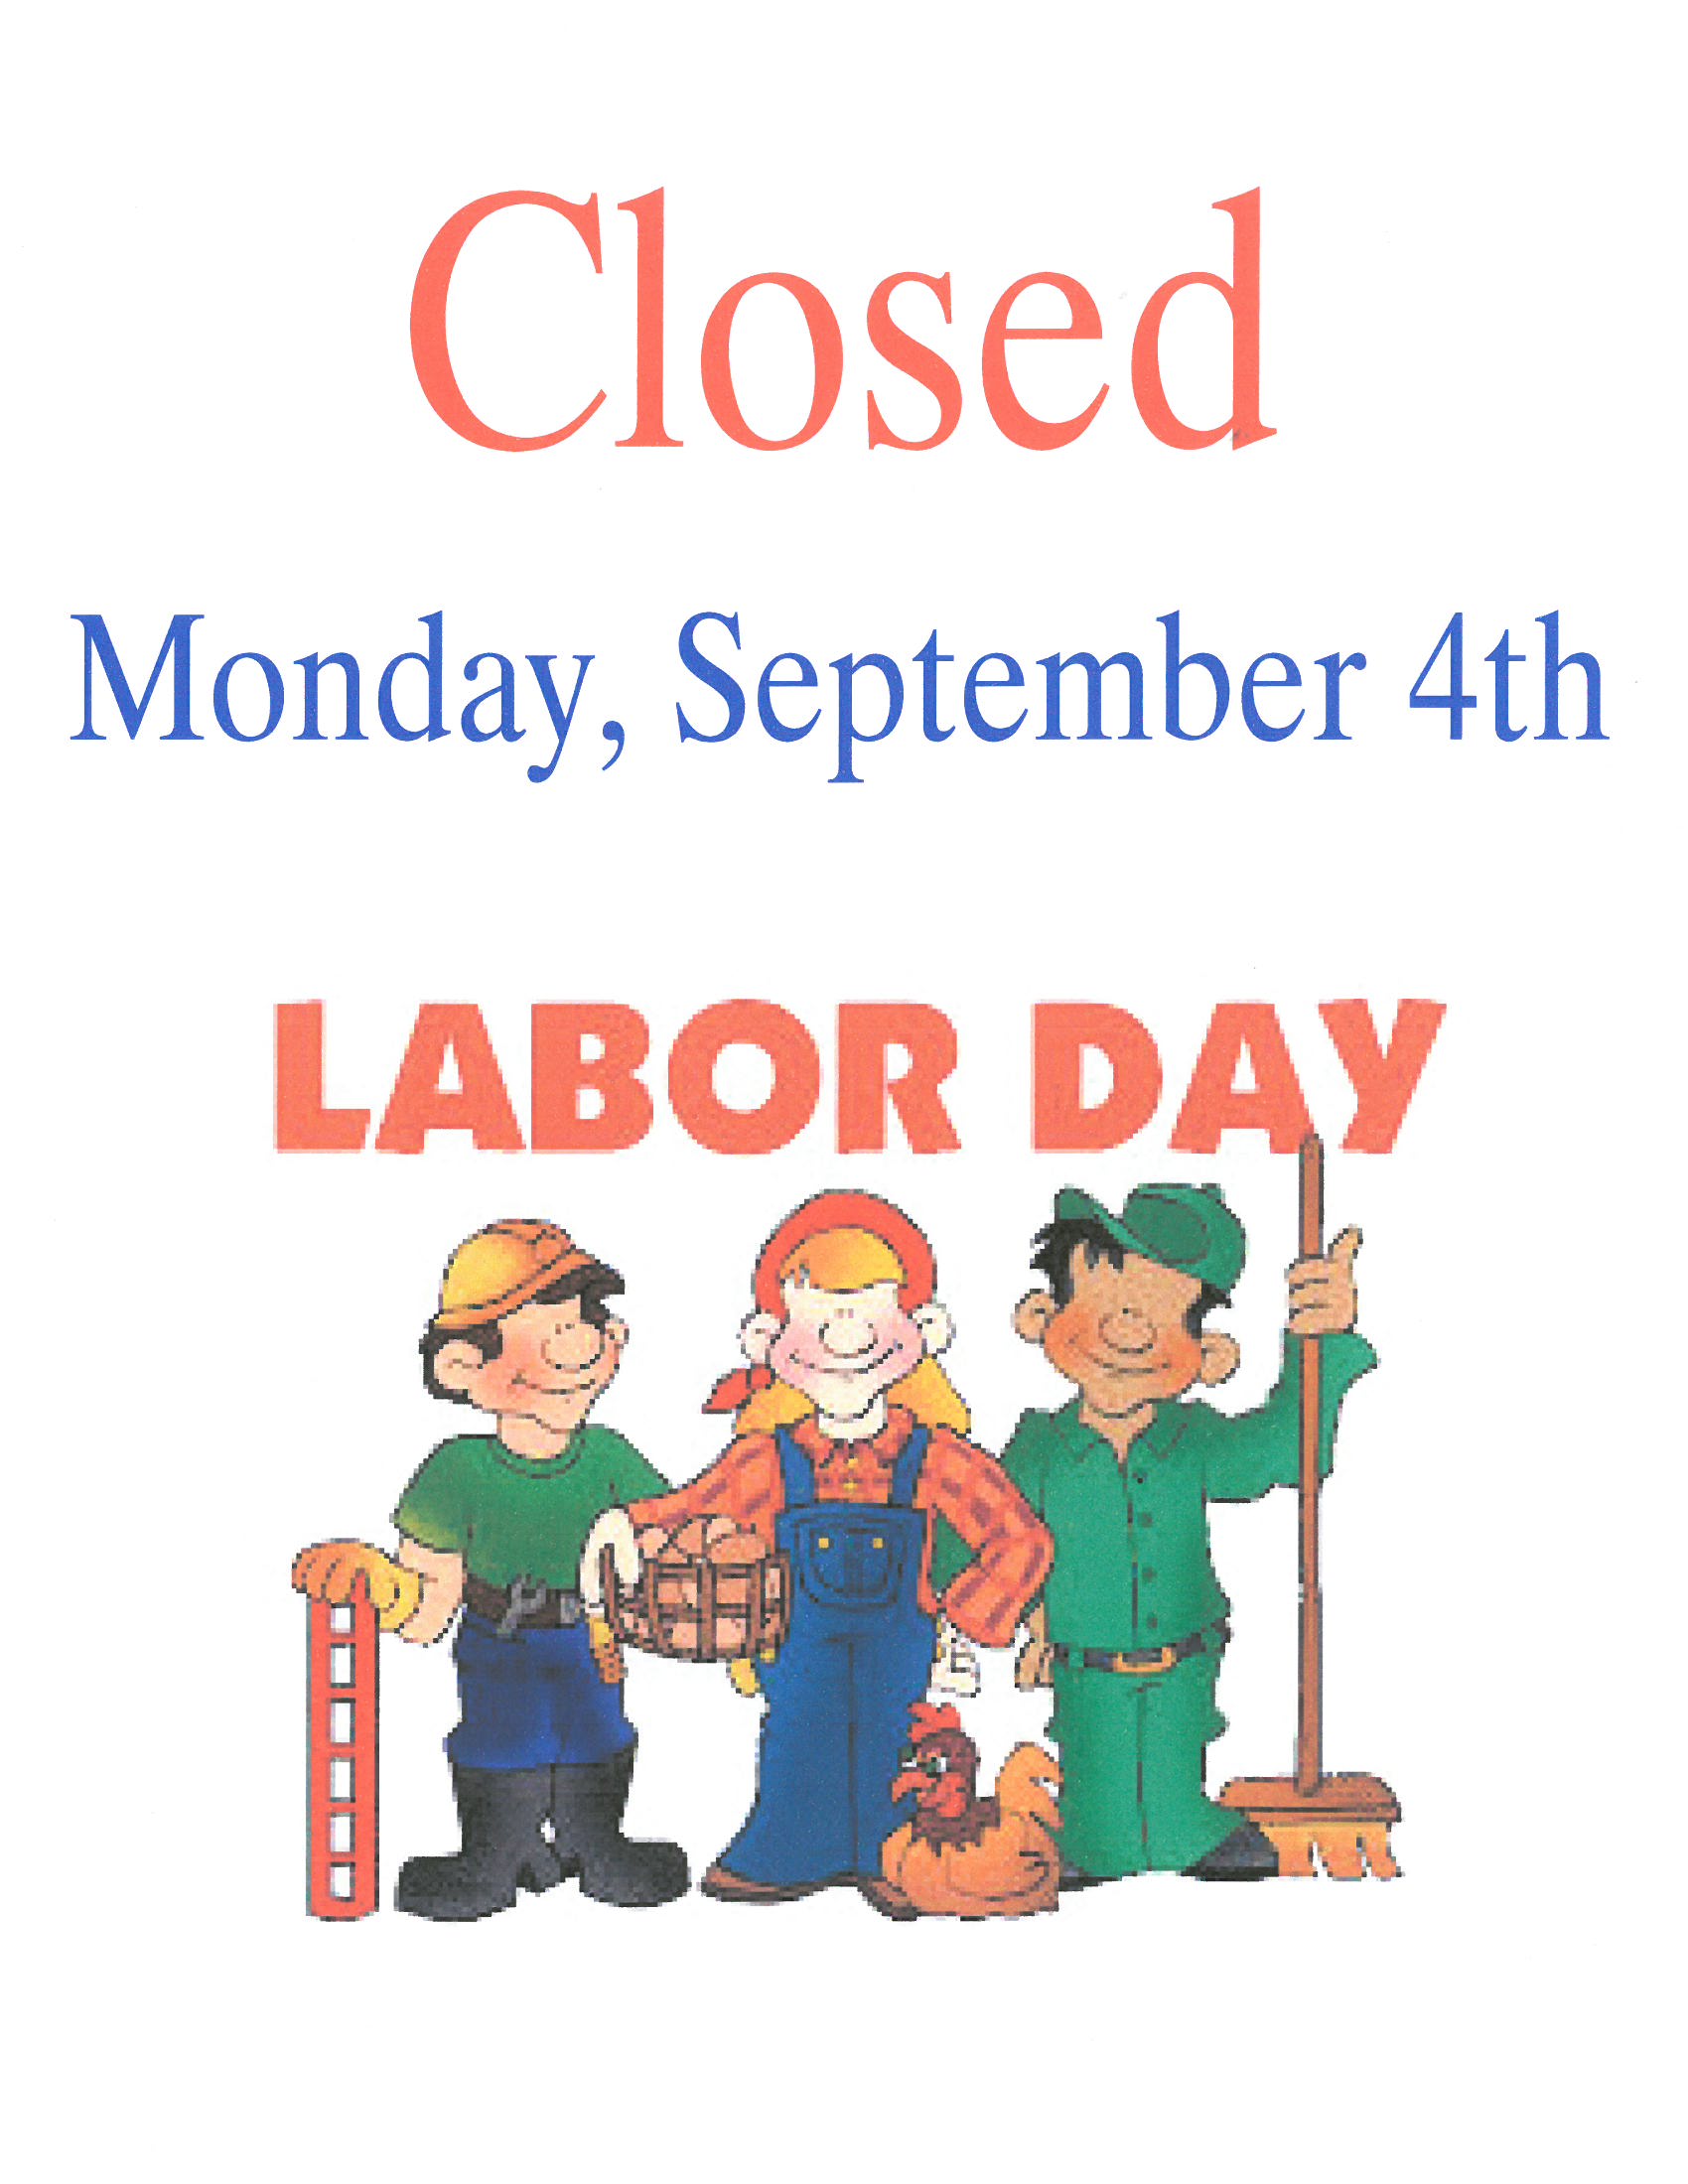 we-will-be-closed-on-monday-sept-4th-for-labor-day-peru-public-library